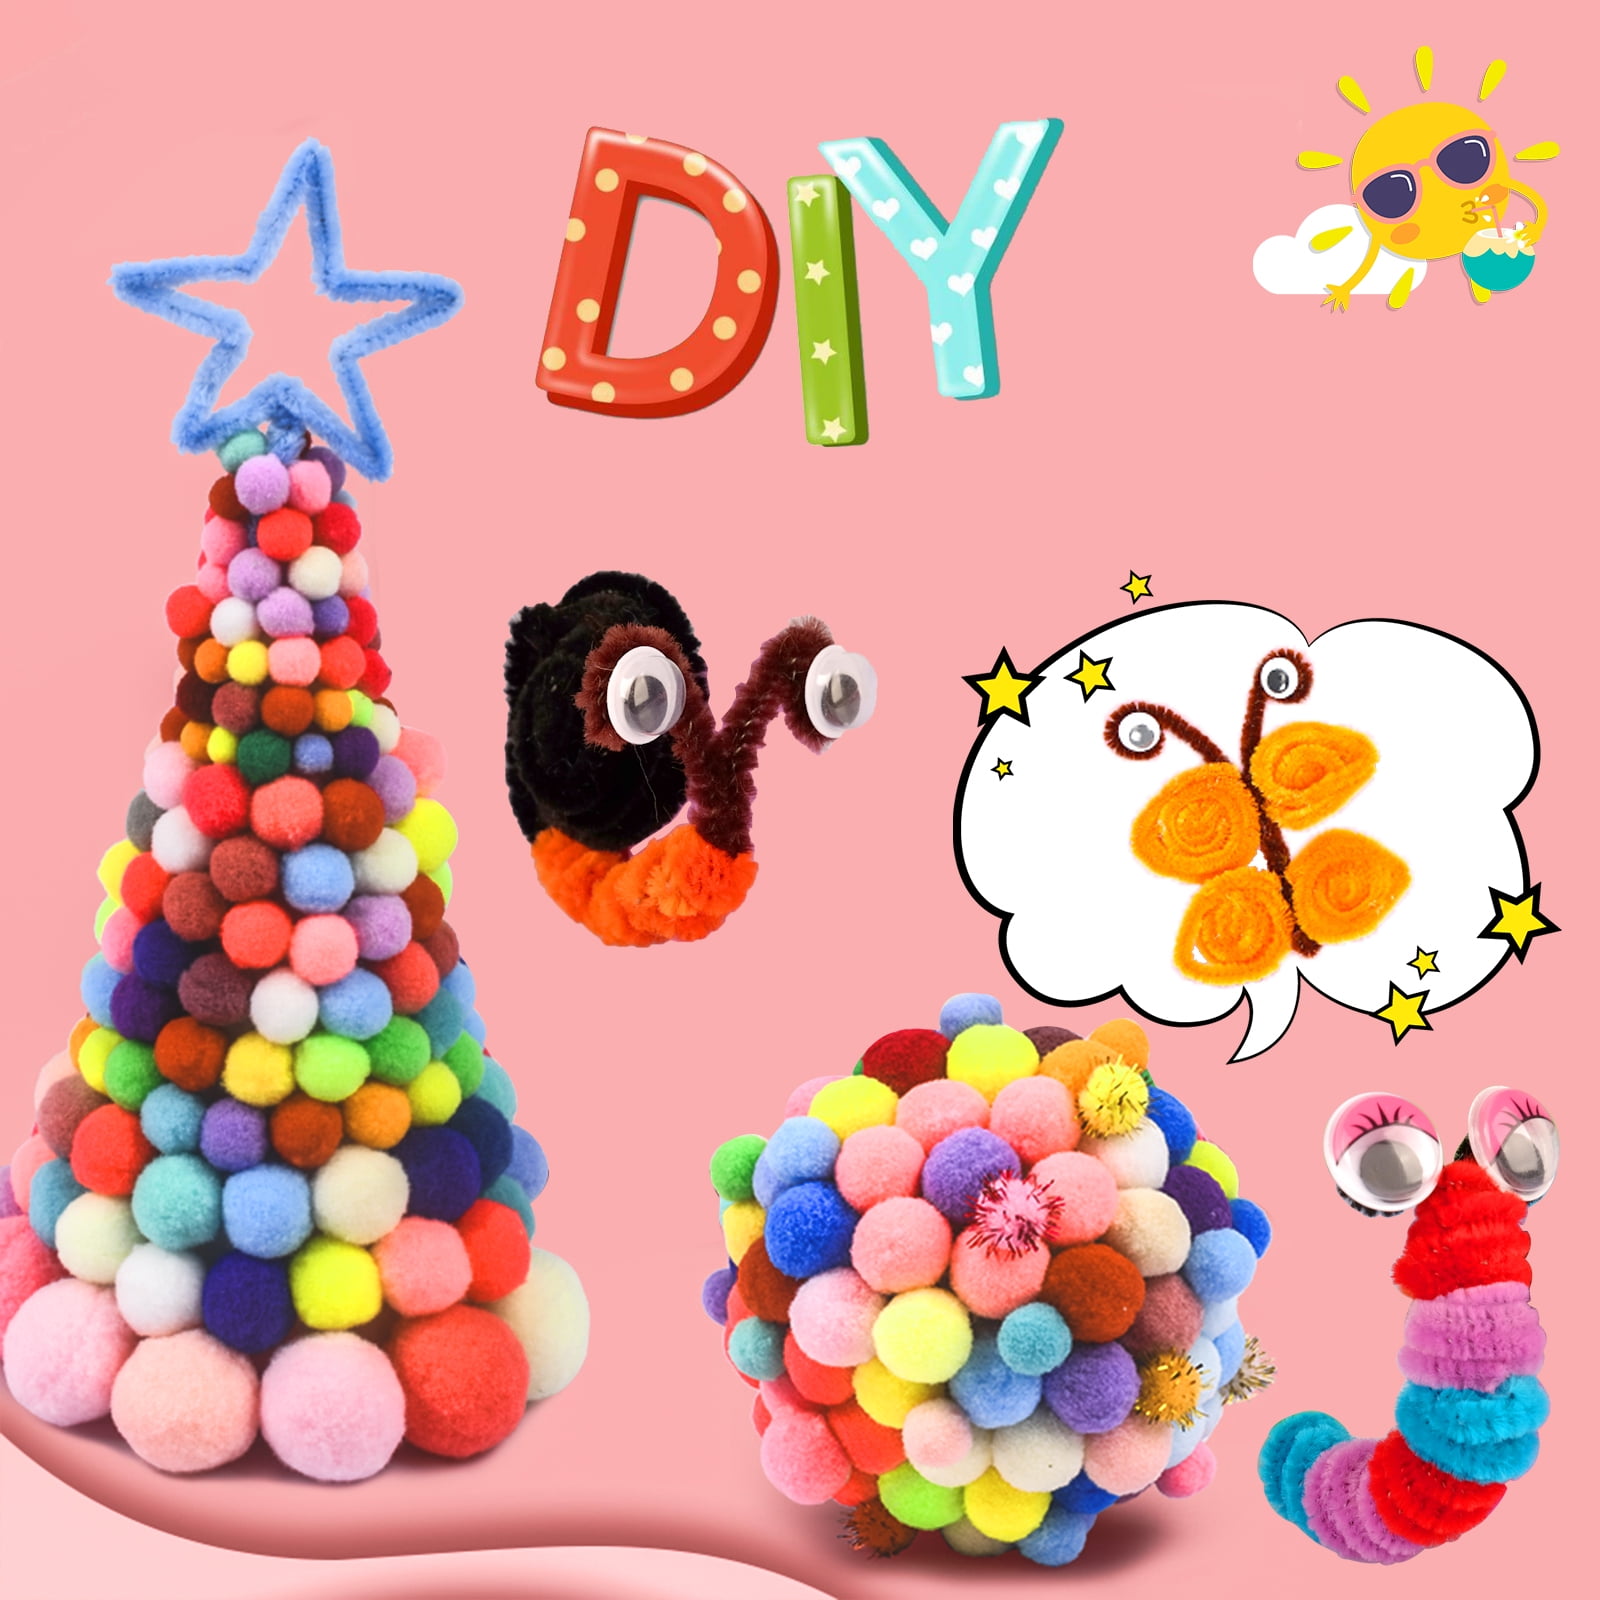 Dikence Craft Gifts for 8 9 10 Year Old Girls, DIY Kids Arts Kits for 10 11  12 Year Old Girls Birthday Gifts Resin Silicone Jewelry Making Kit Sets for Kids  Girls